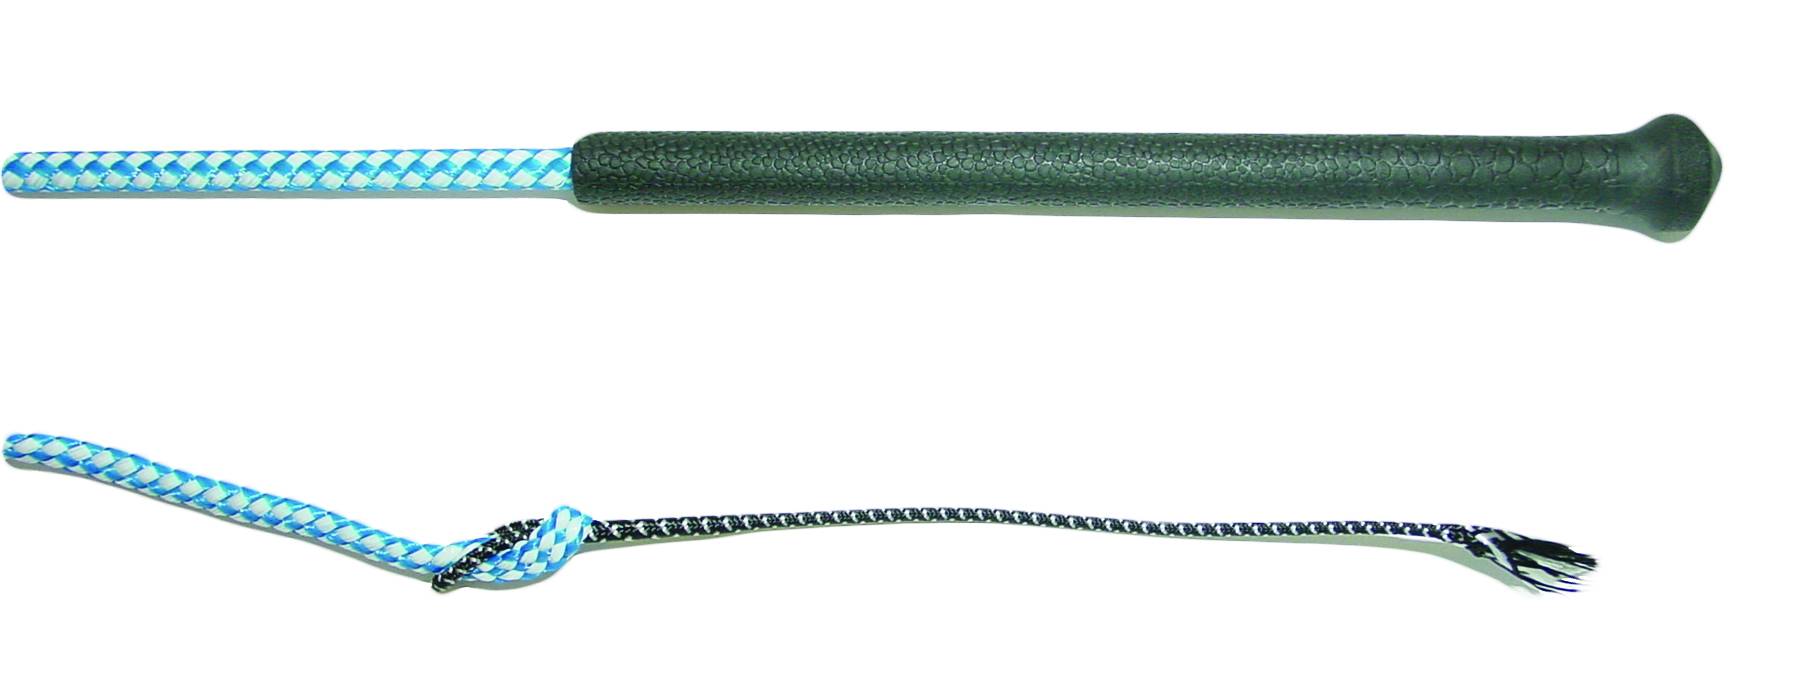 Partrade Stock Whip With Popper